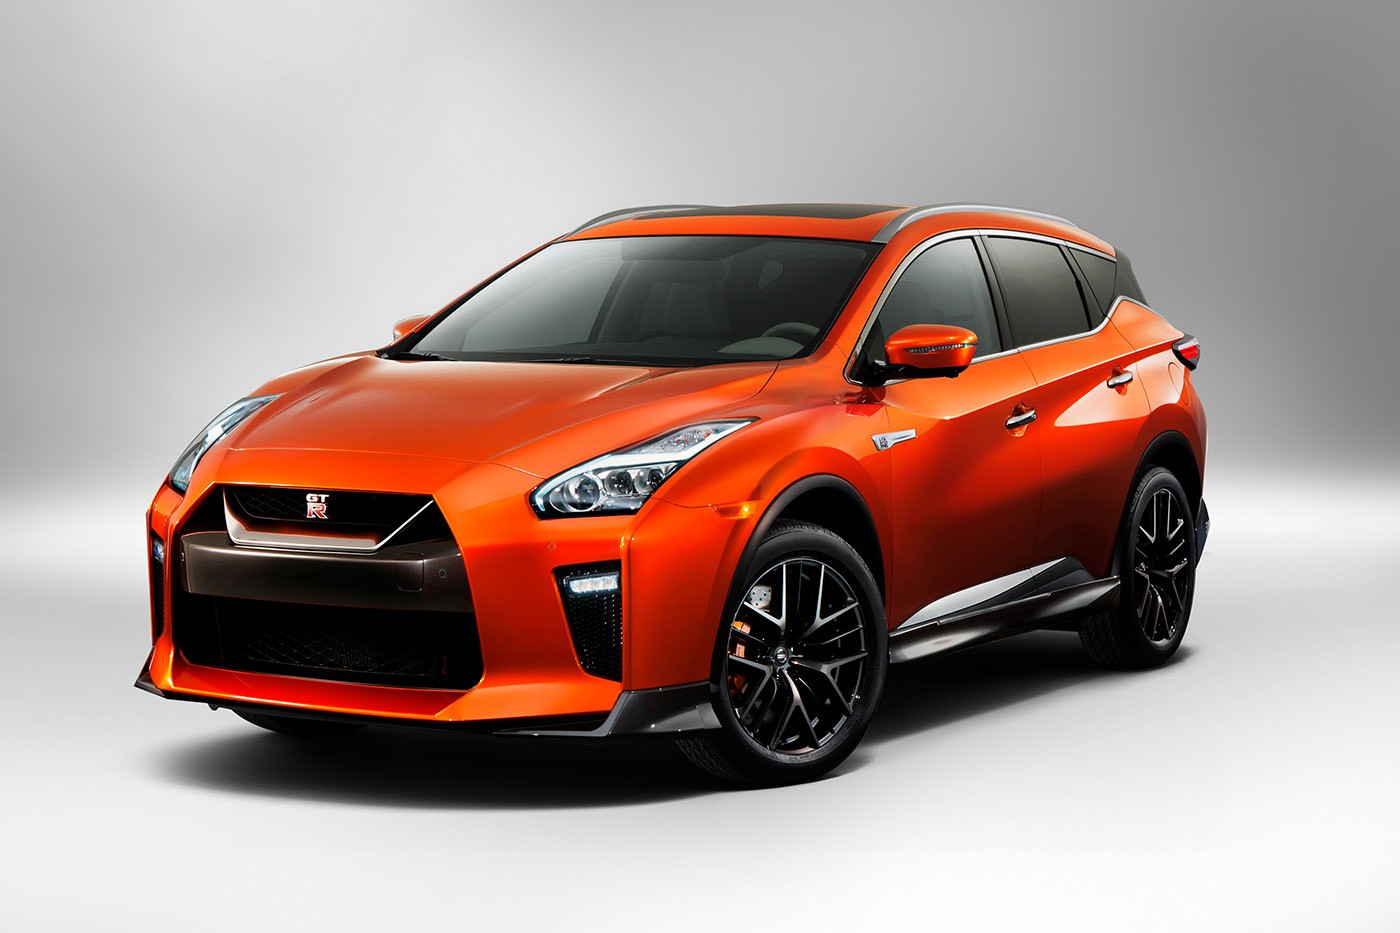 Nissan Gt R Suv Rendered With Murano Side Profile Looks Ludicrous Autoevolution